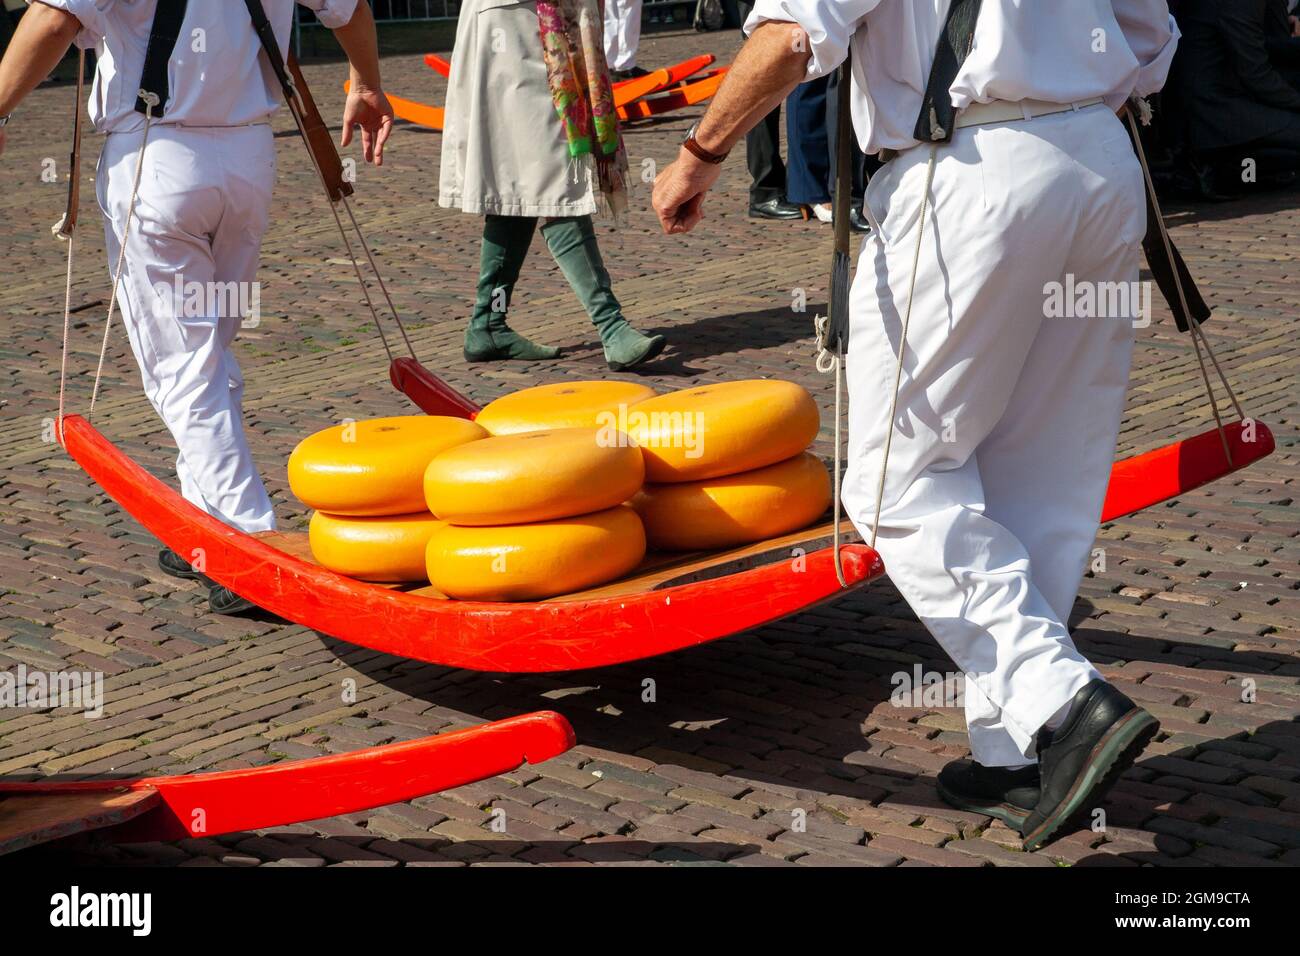 Traditional Dutch cheese market on the market square in Alkmaar, The Netherlands. September 3, 2010 Stock Photo